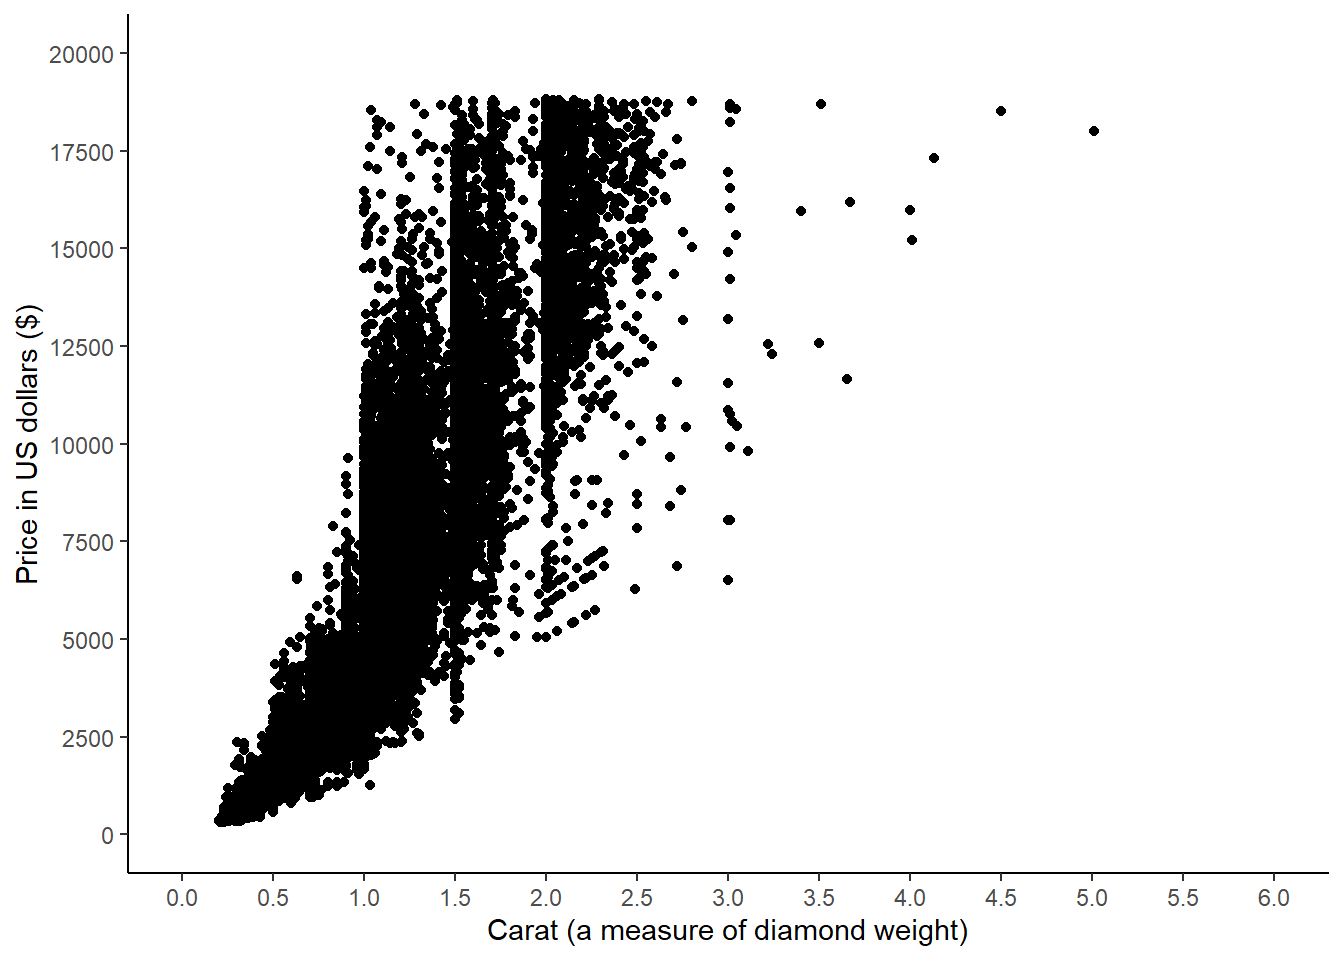 A ggplot object with a geom_point layer, the price of diamonds by their carat, adjusted labels